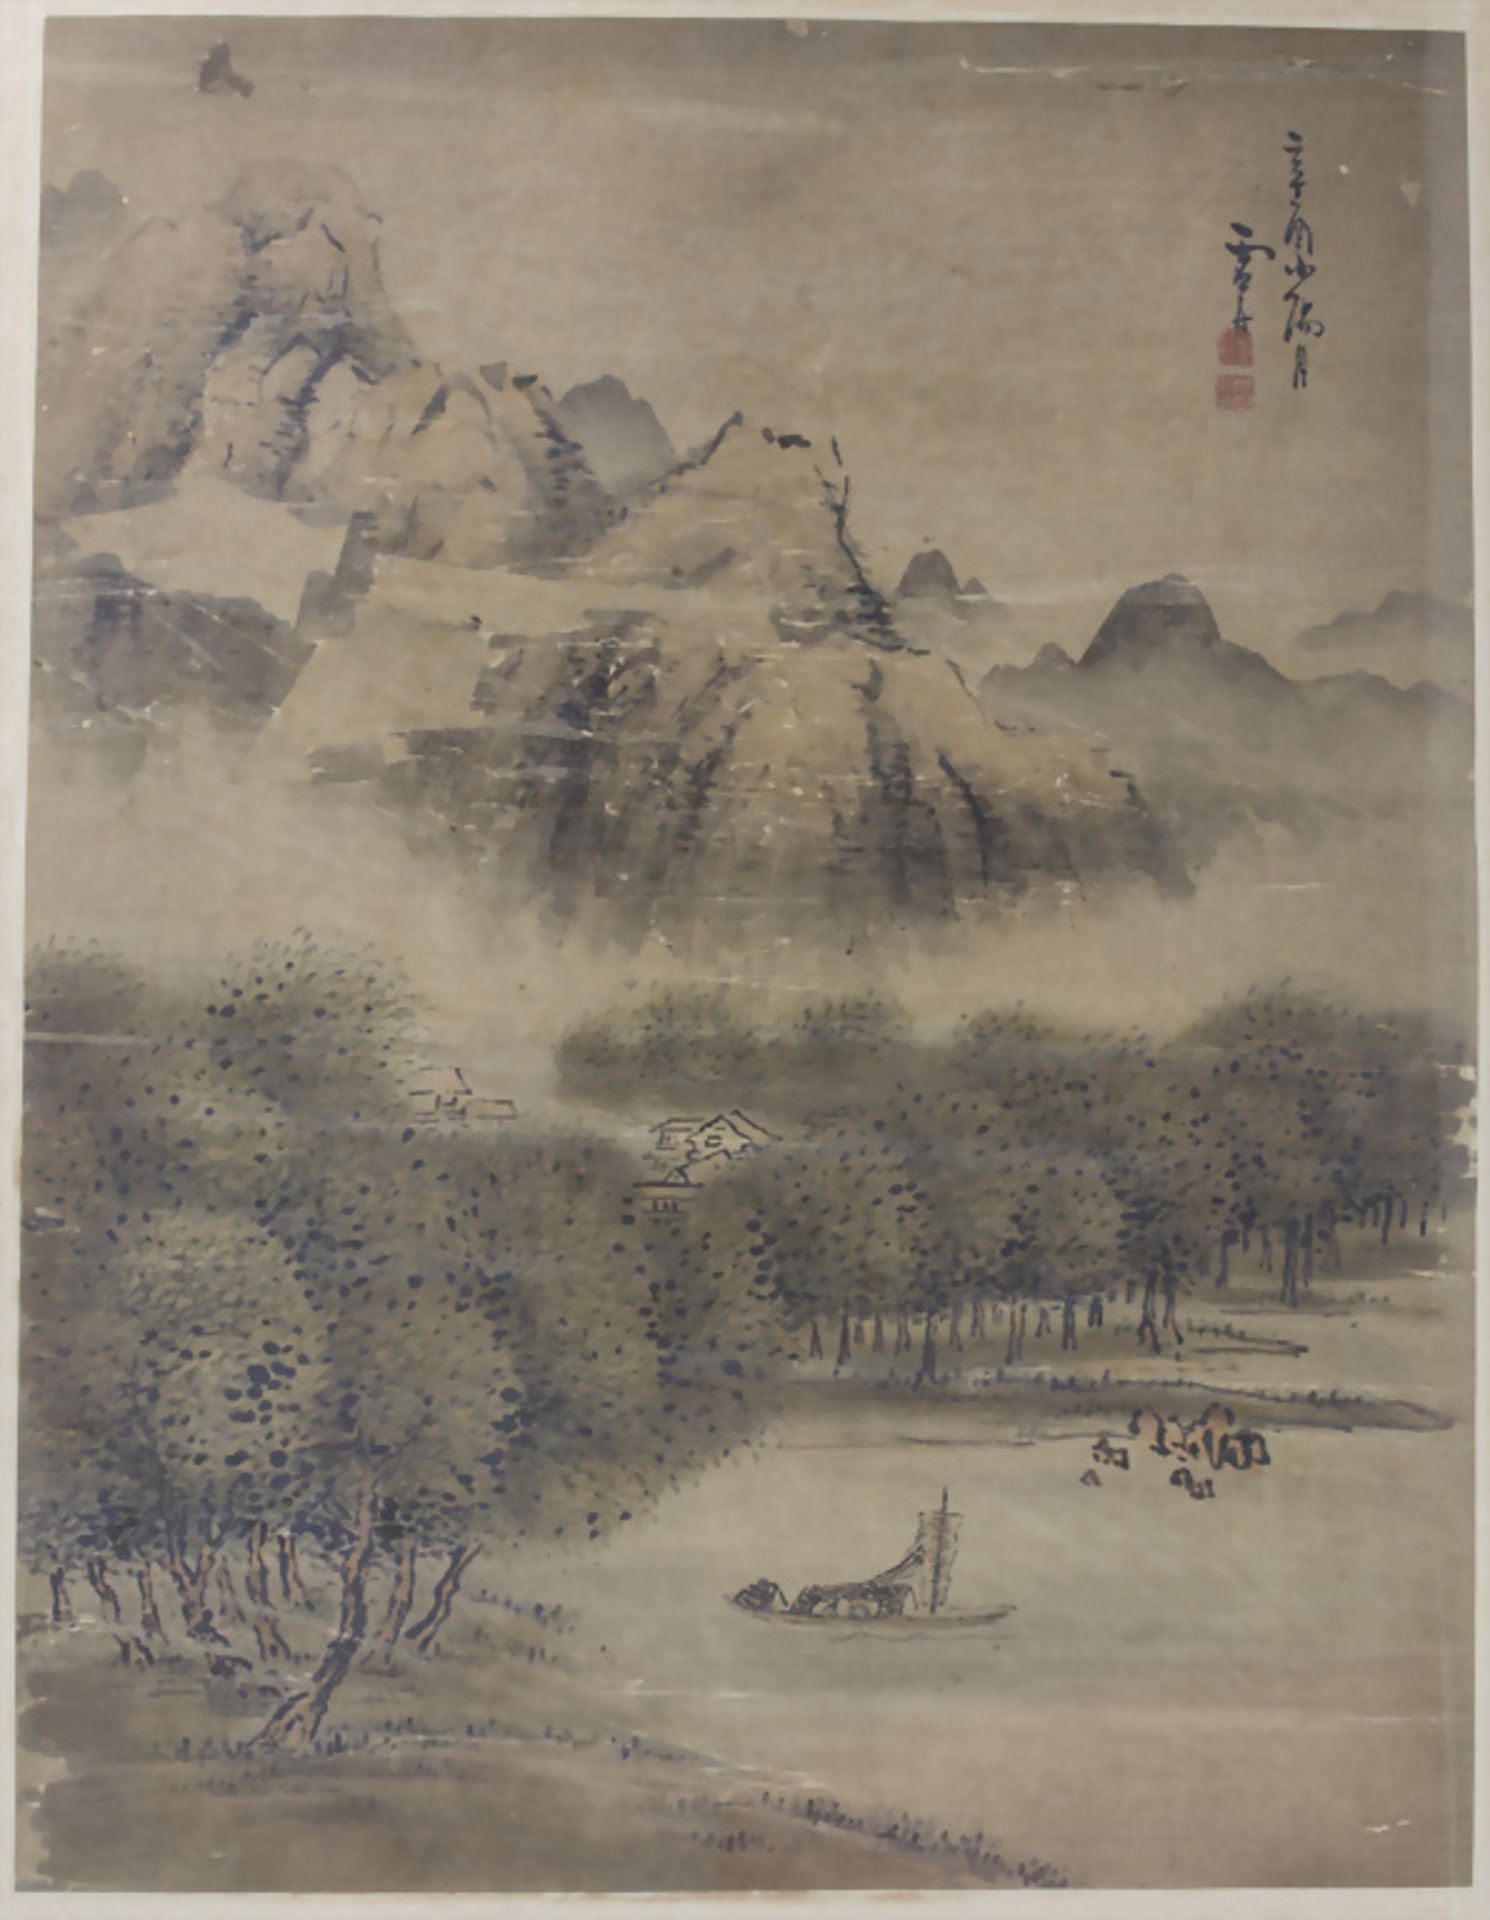 Feine Stoffmalerei 'Landschaft mit See' / A painting on fabric 'landcape with lake', China, ...